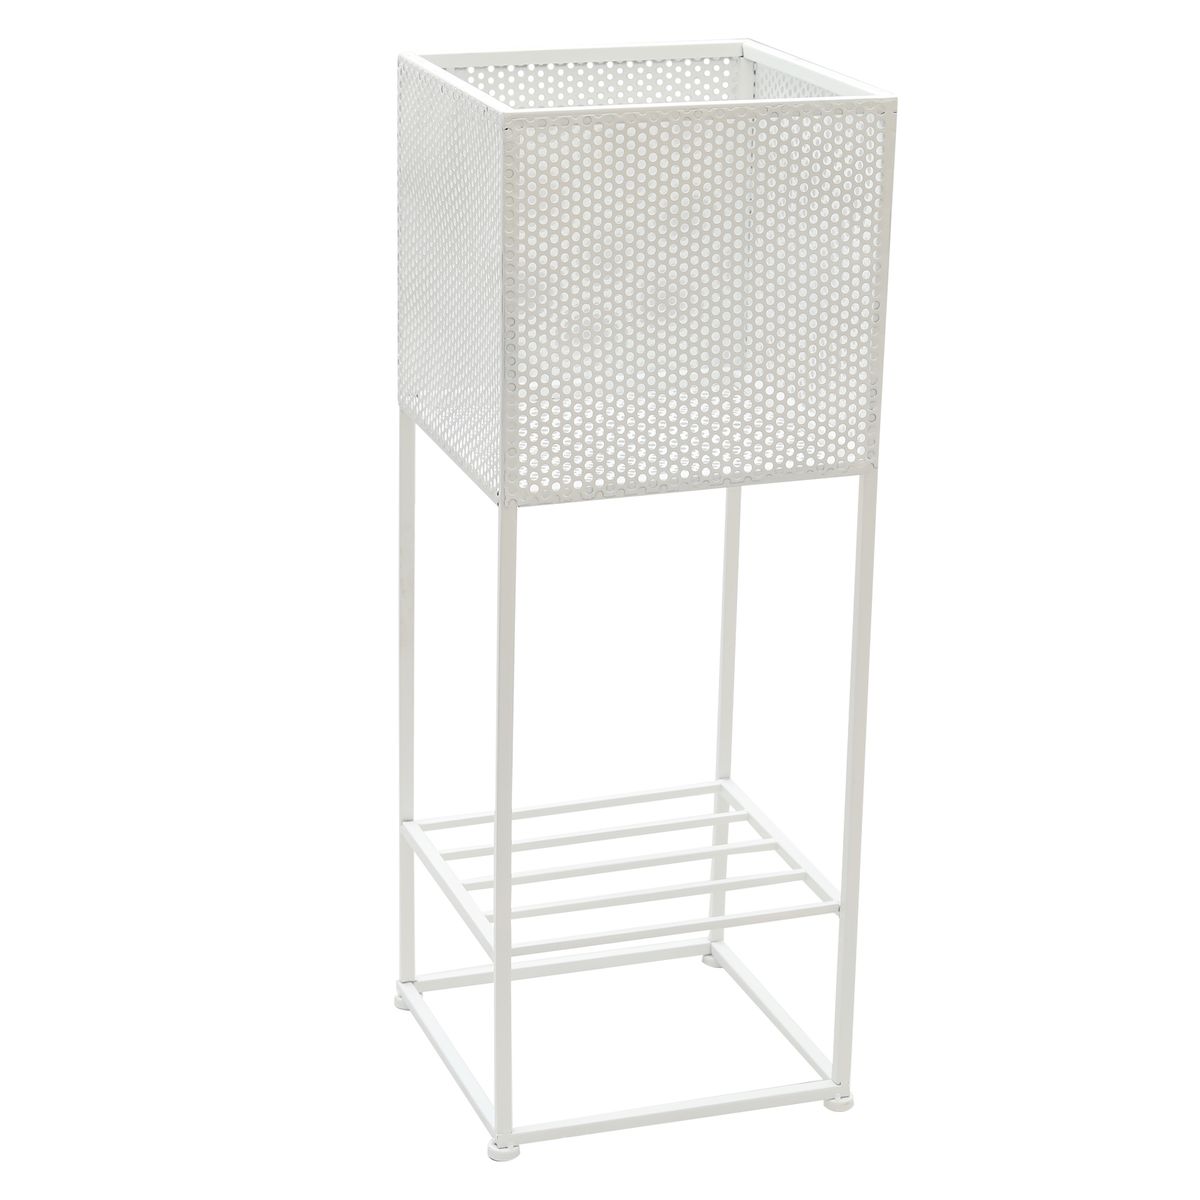 Infinity Retro Metal Pot Plant Stand - White | Shop Today. Get it ...